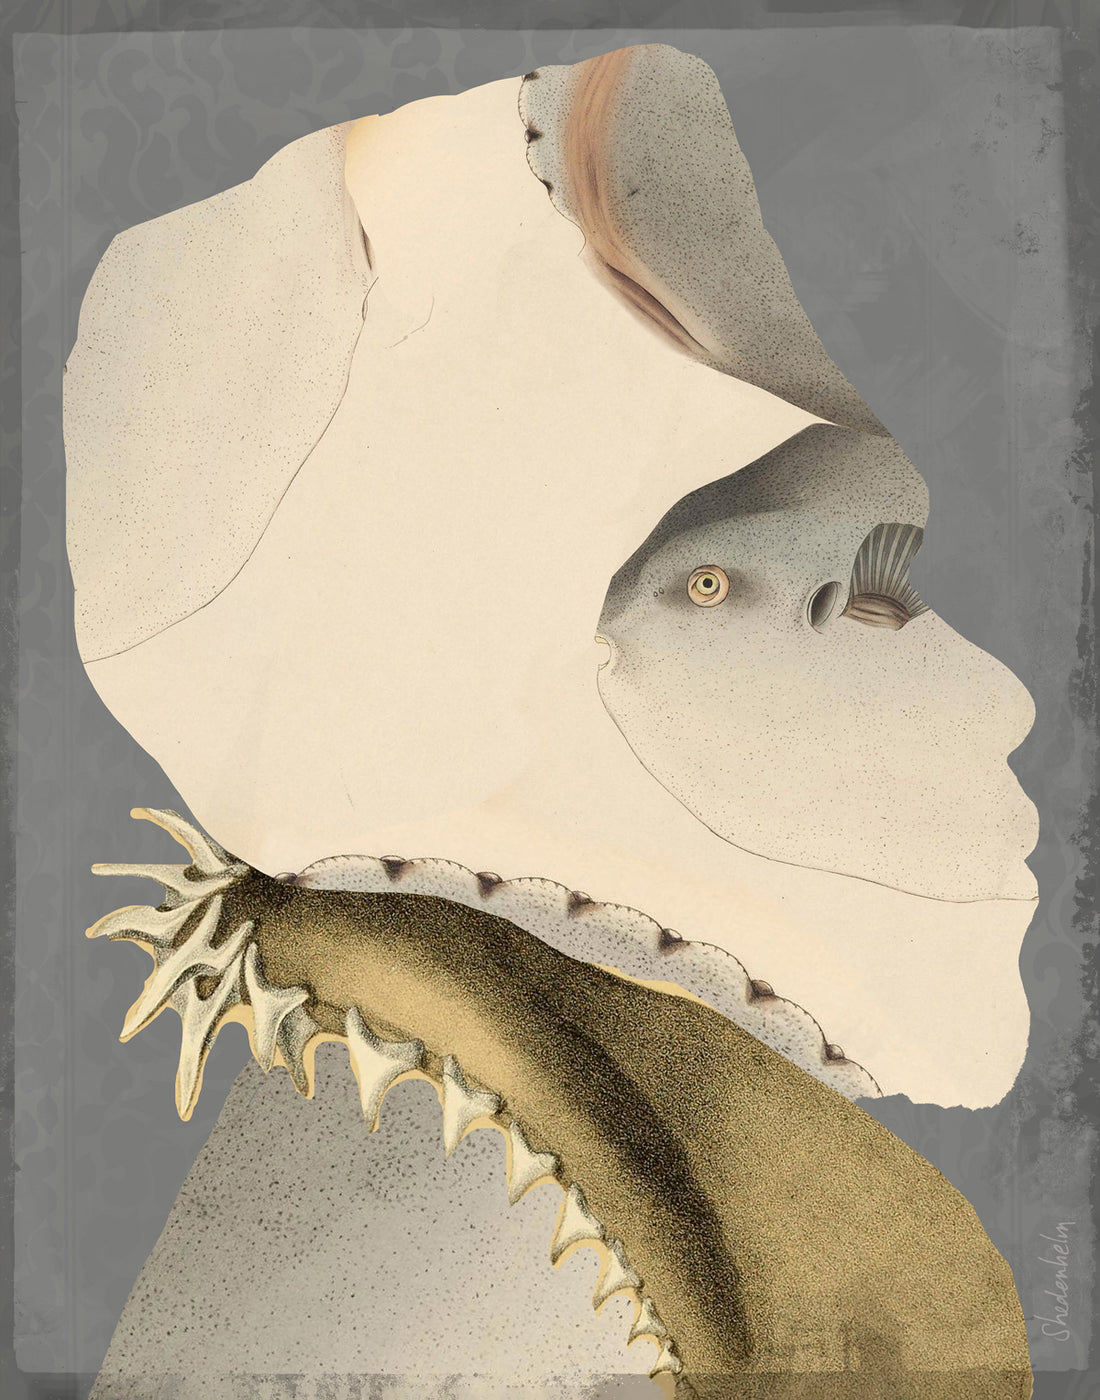 'Transformations' A Collage Story by Kendra Shedenhelm opens May 5th!